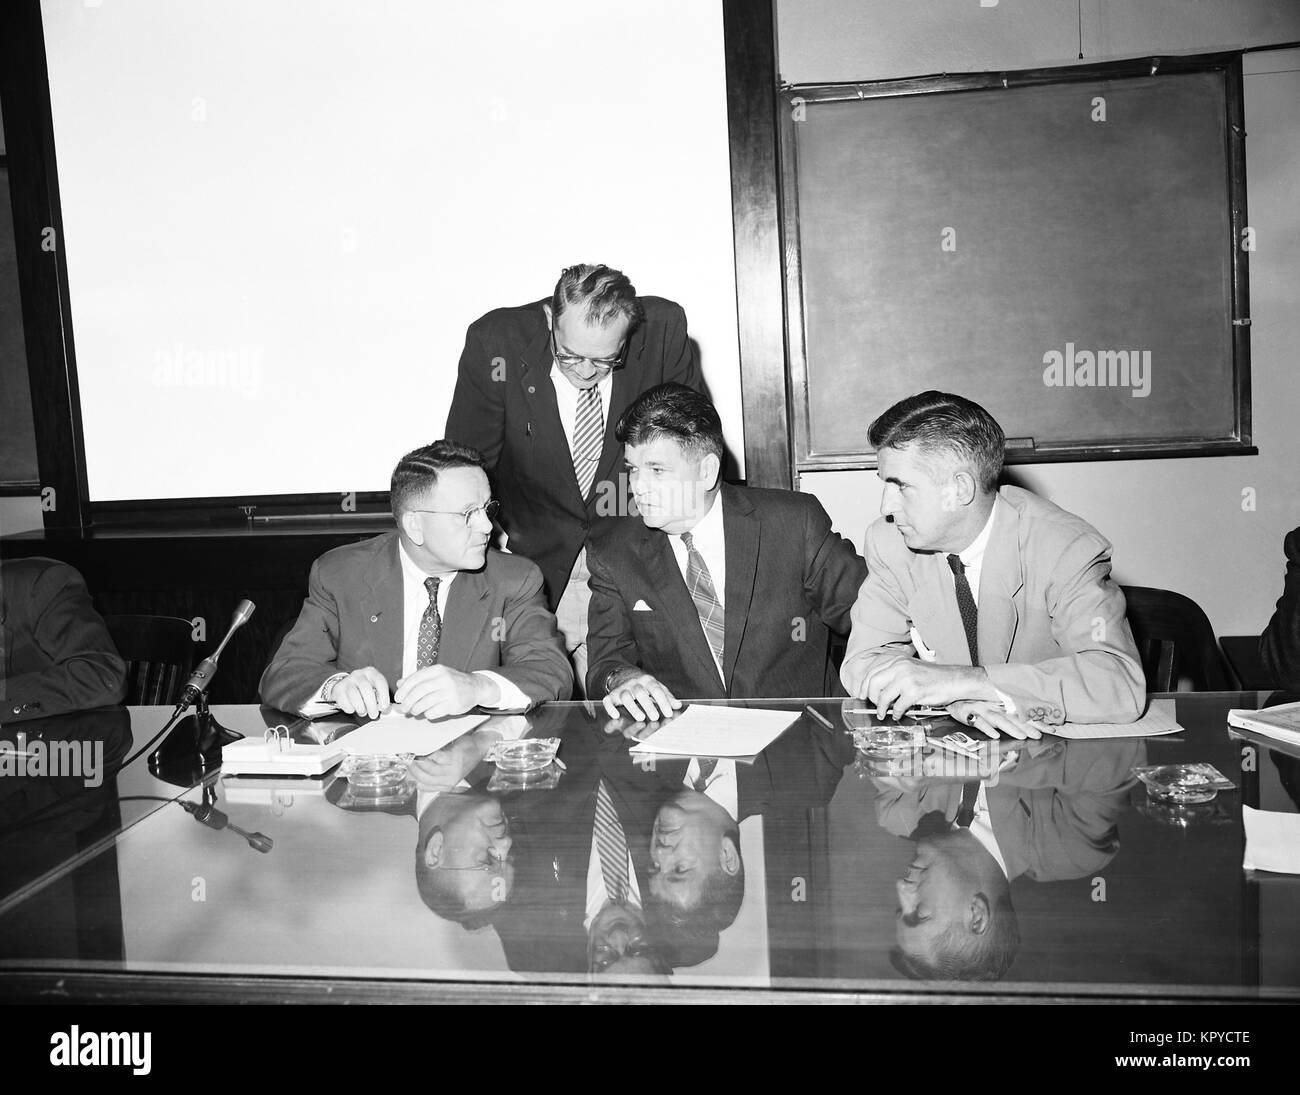 This 1956 photograph depicts four CDC officials during a bid opening meeting for the construction of new CDC facilities, 1956. Various governmental contracts are governed by established protocols, which often include a bidding process amongst interested parties. Image courtesy CDC. Stock Photo